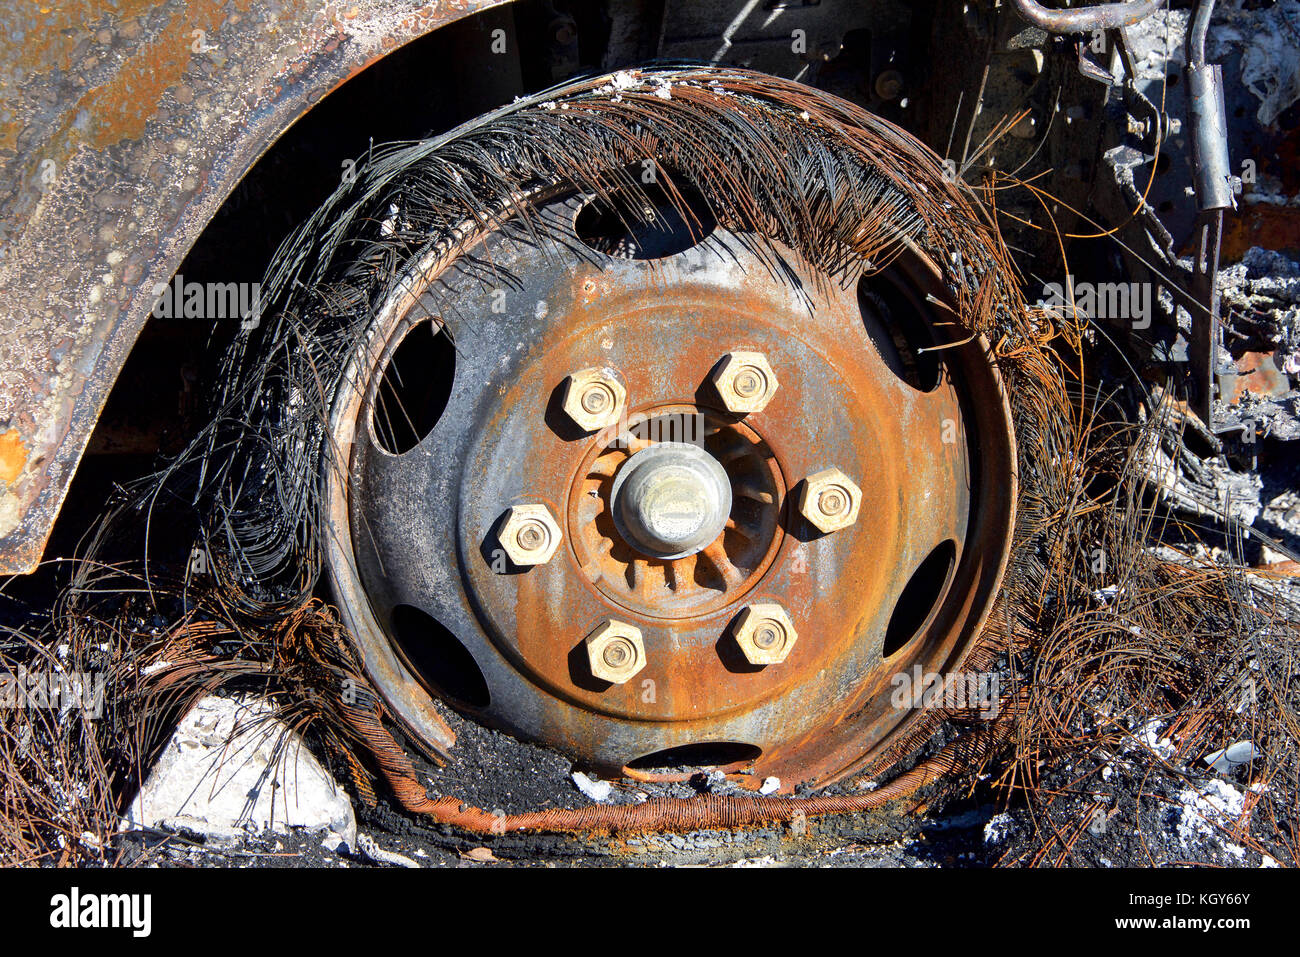 Truck tire burned in wildfire in Northern California, exposing steel belts Stock Photo